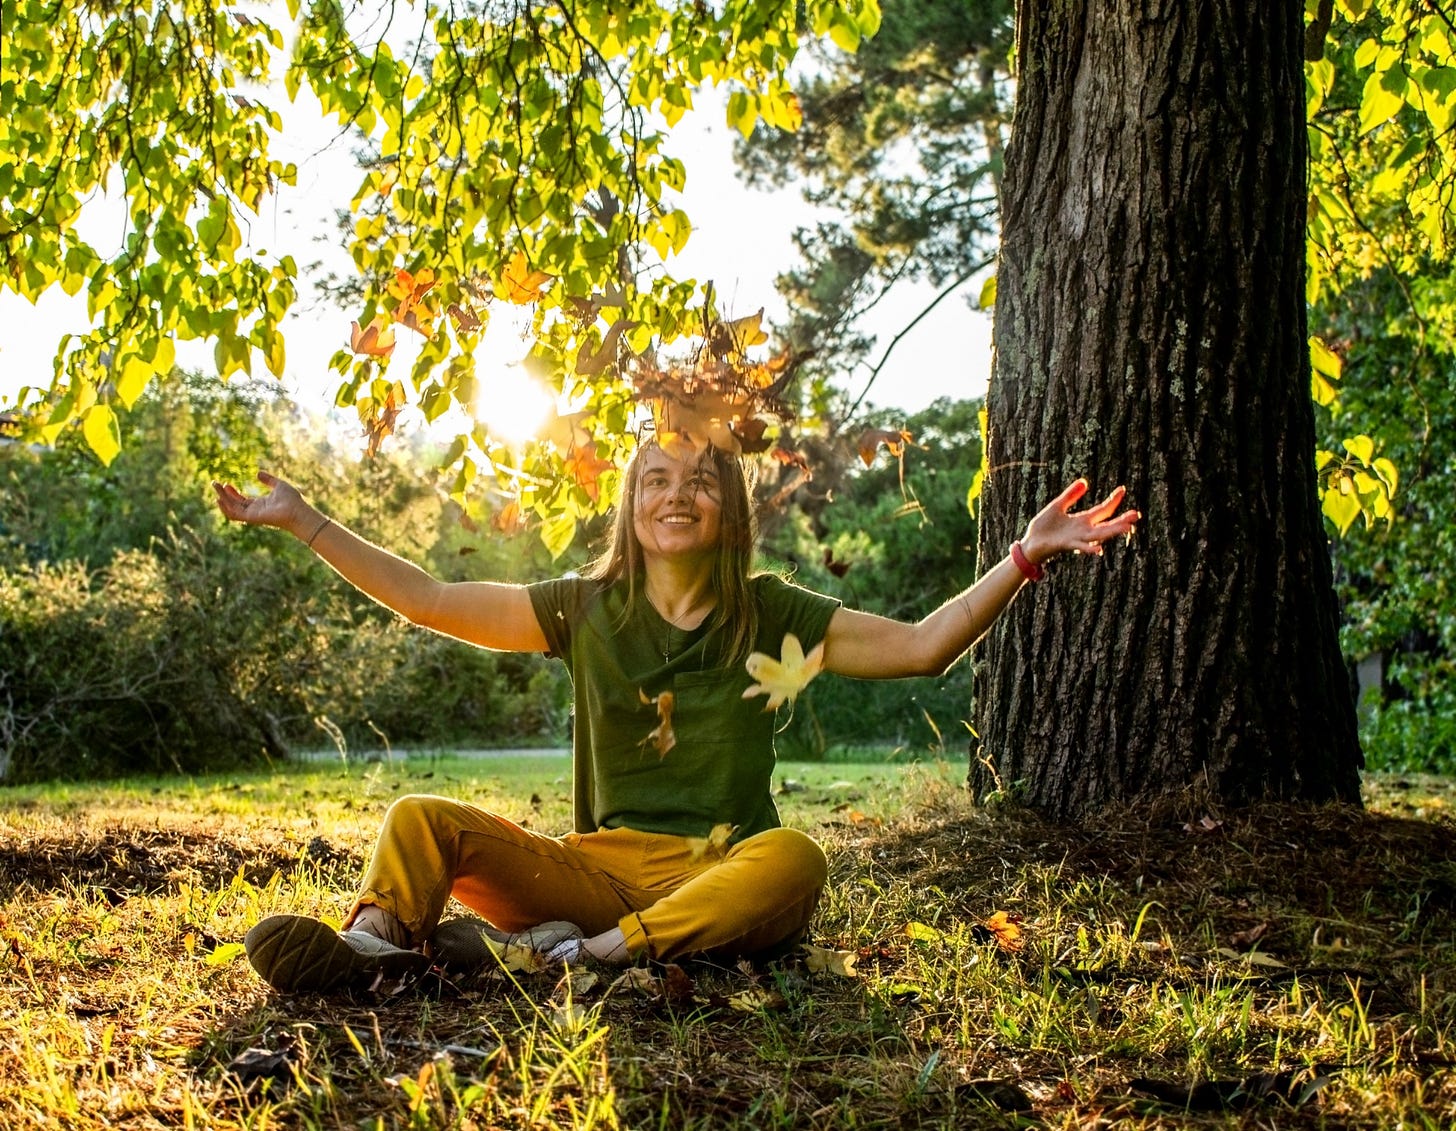 A woman smiles and throws a piles of leaves above her head in the bright sunlight of a park.